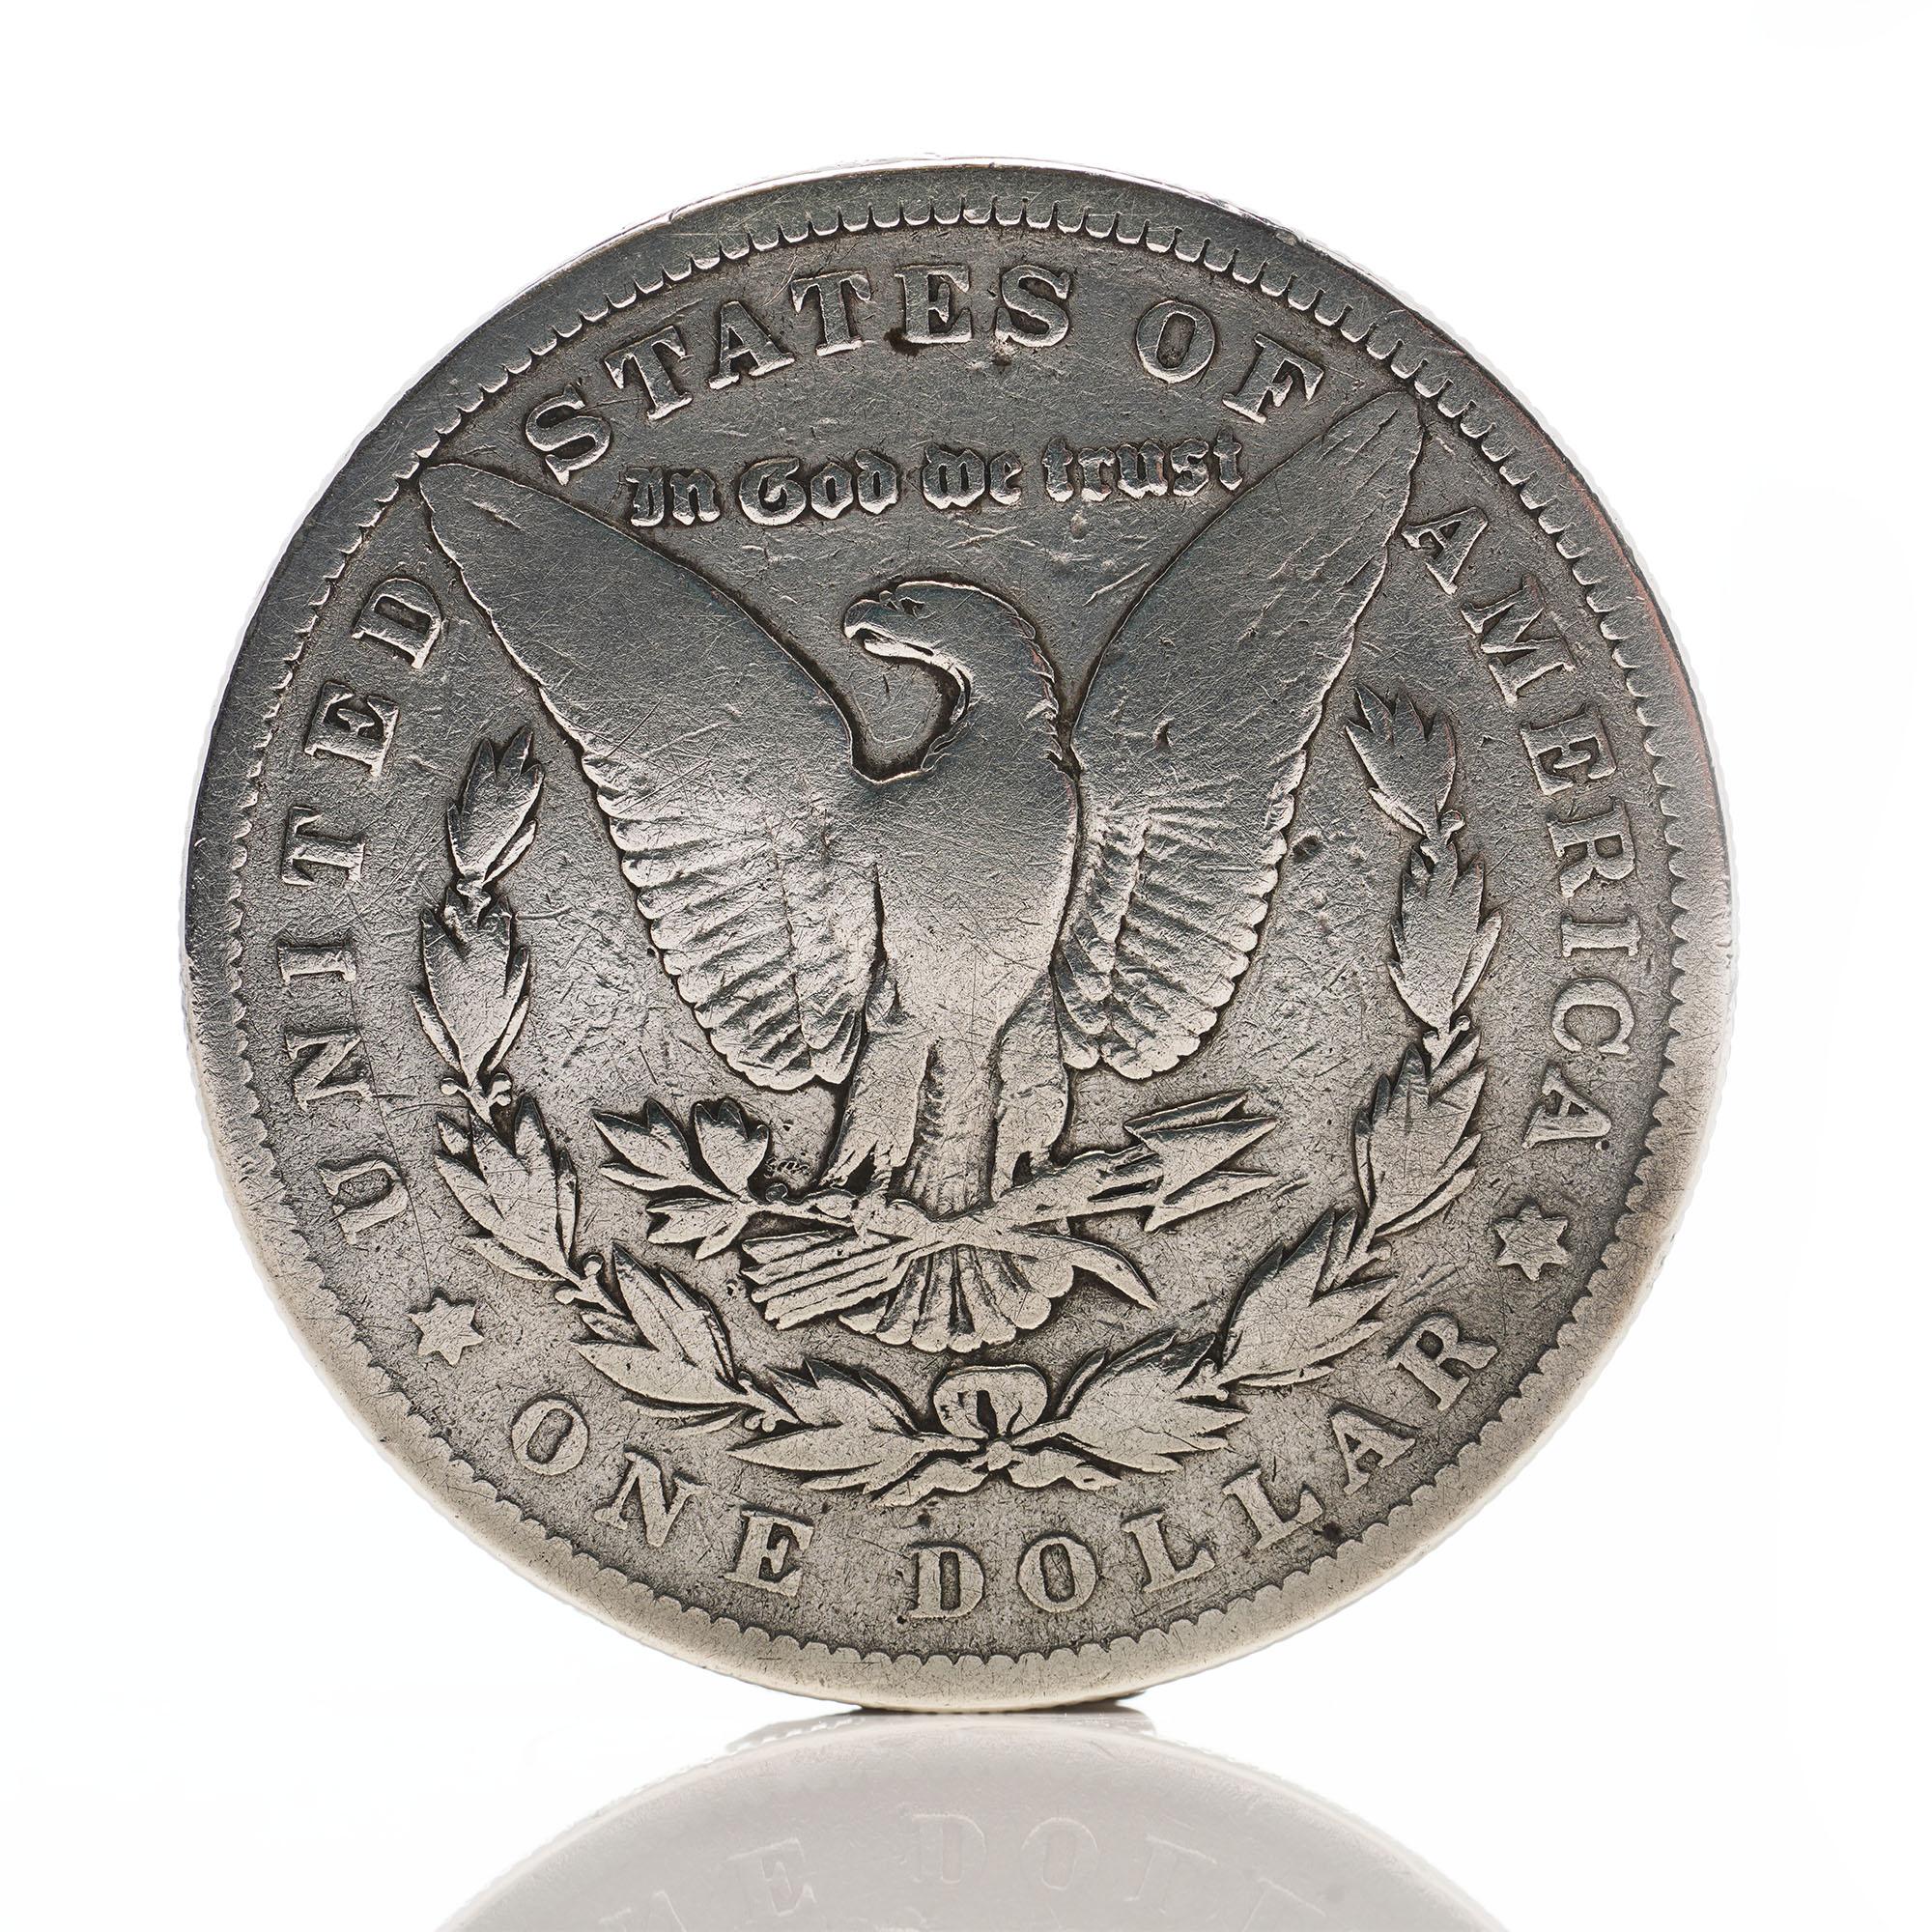 Antique 1878 Morgan dollar
Silver fineness: 900 
Made in USA, 1878

1878 is the first year of the popular Morgan dollar series. 

The Morgan Dollar is one of the most famous coins in American history. It evokes images of the Wild West. Cowboys